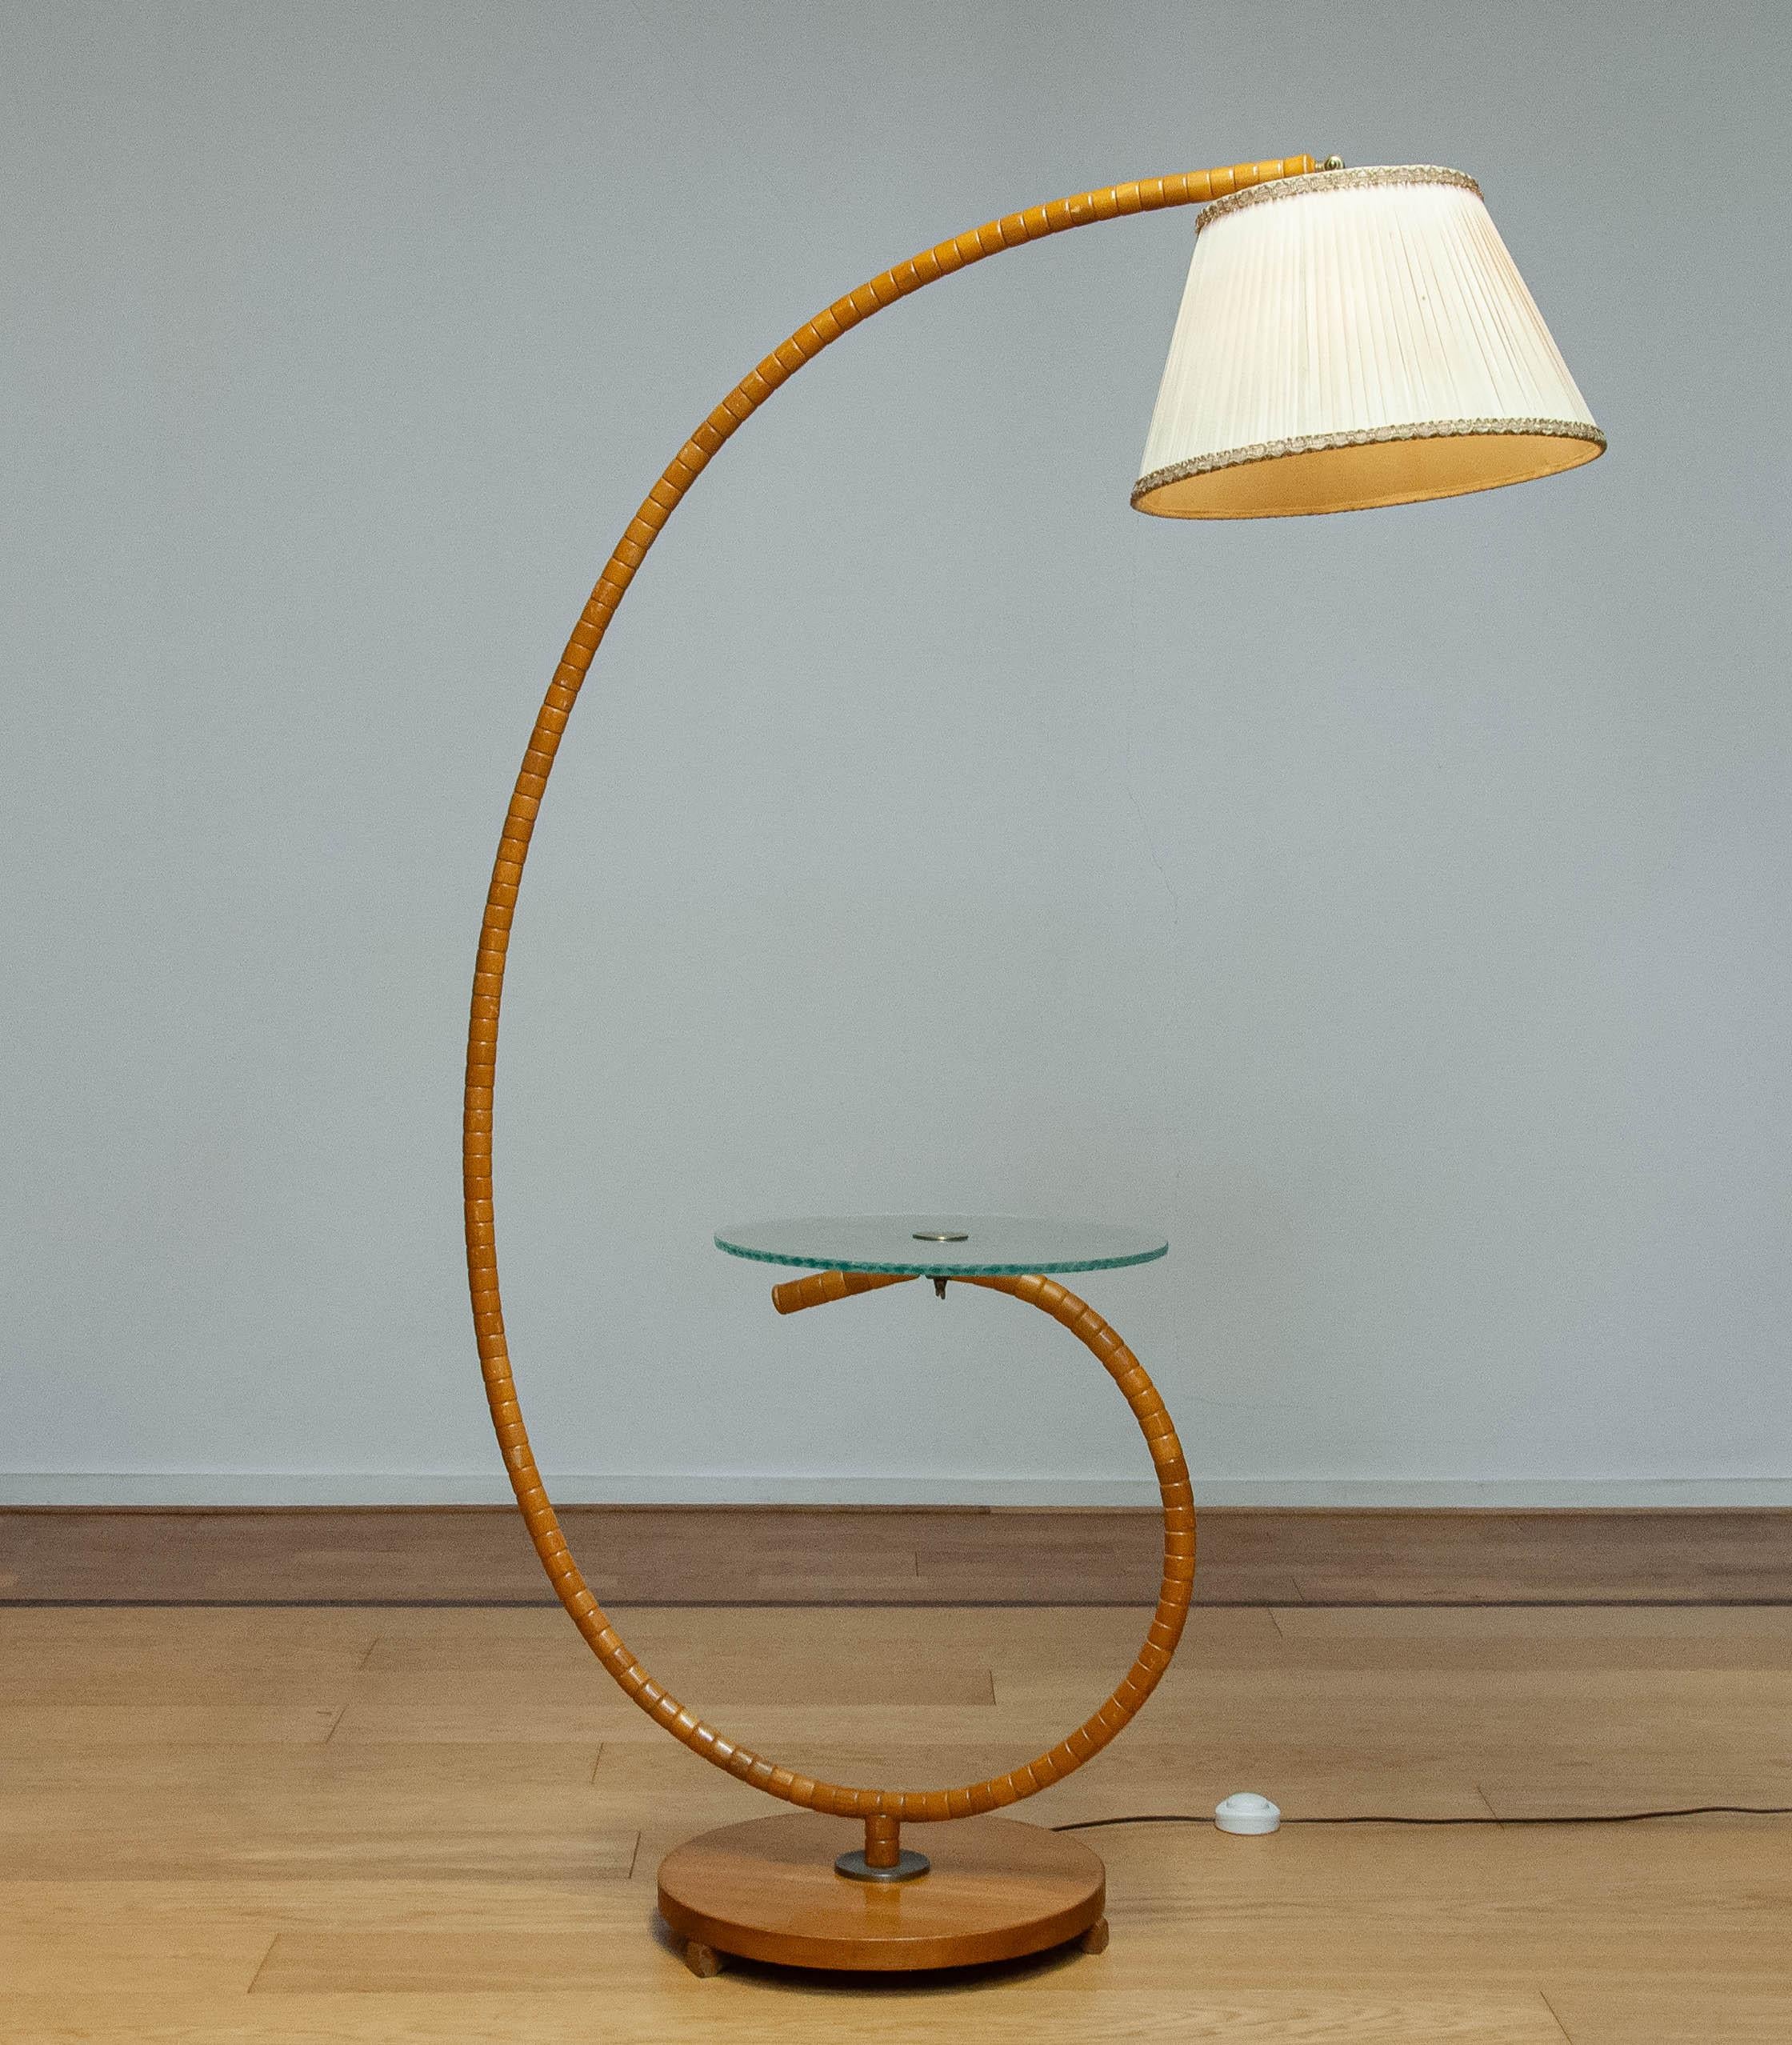 1940 Swedish Art Nouveau Floor Lamp In Elm With Art Glass Table By IWO Mariestad For Sale 5